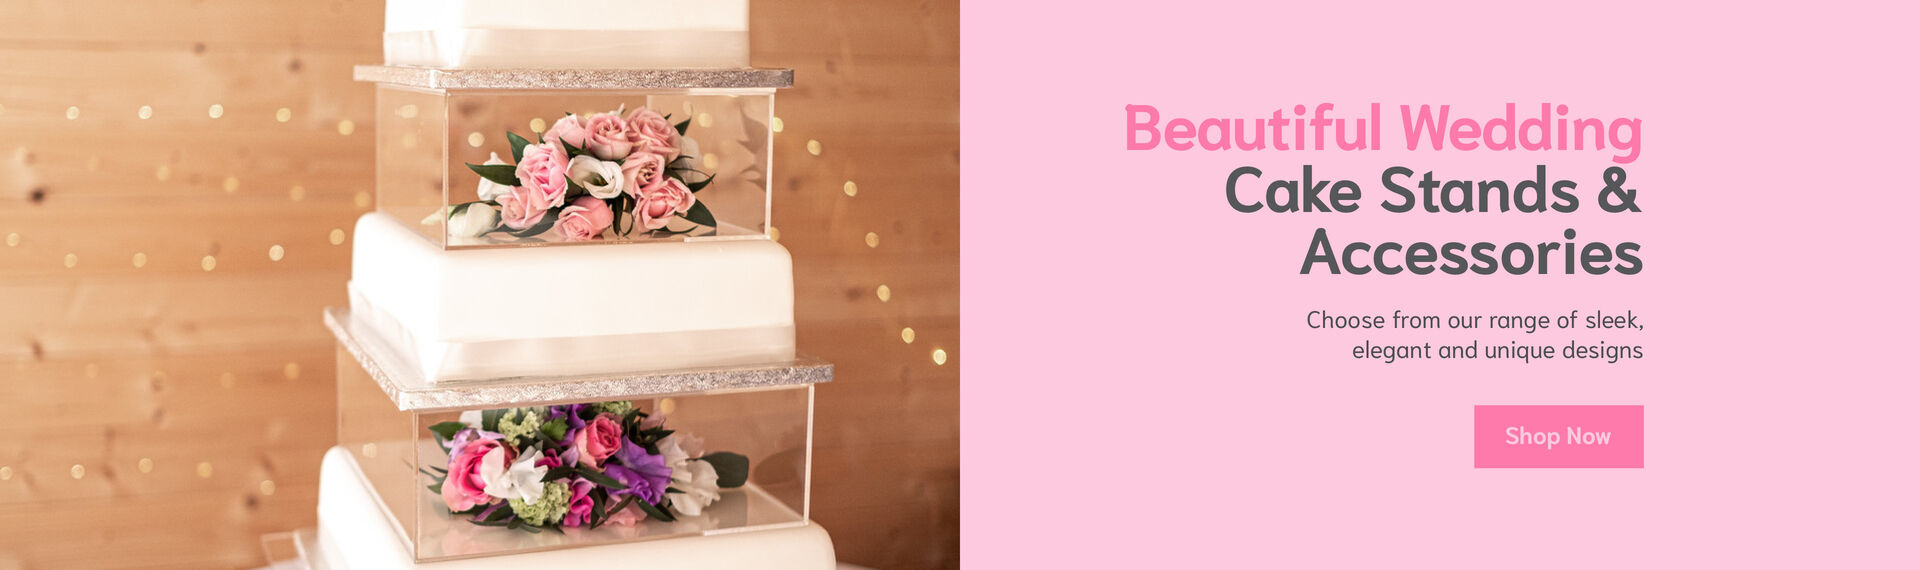 Beautiful Wedding Cake Stands & Accessories